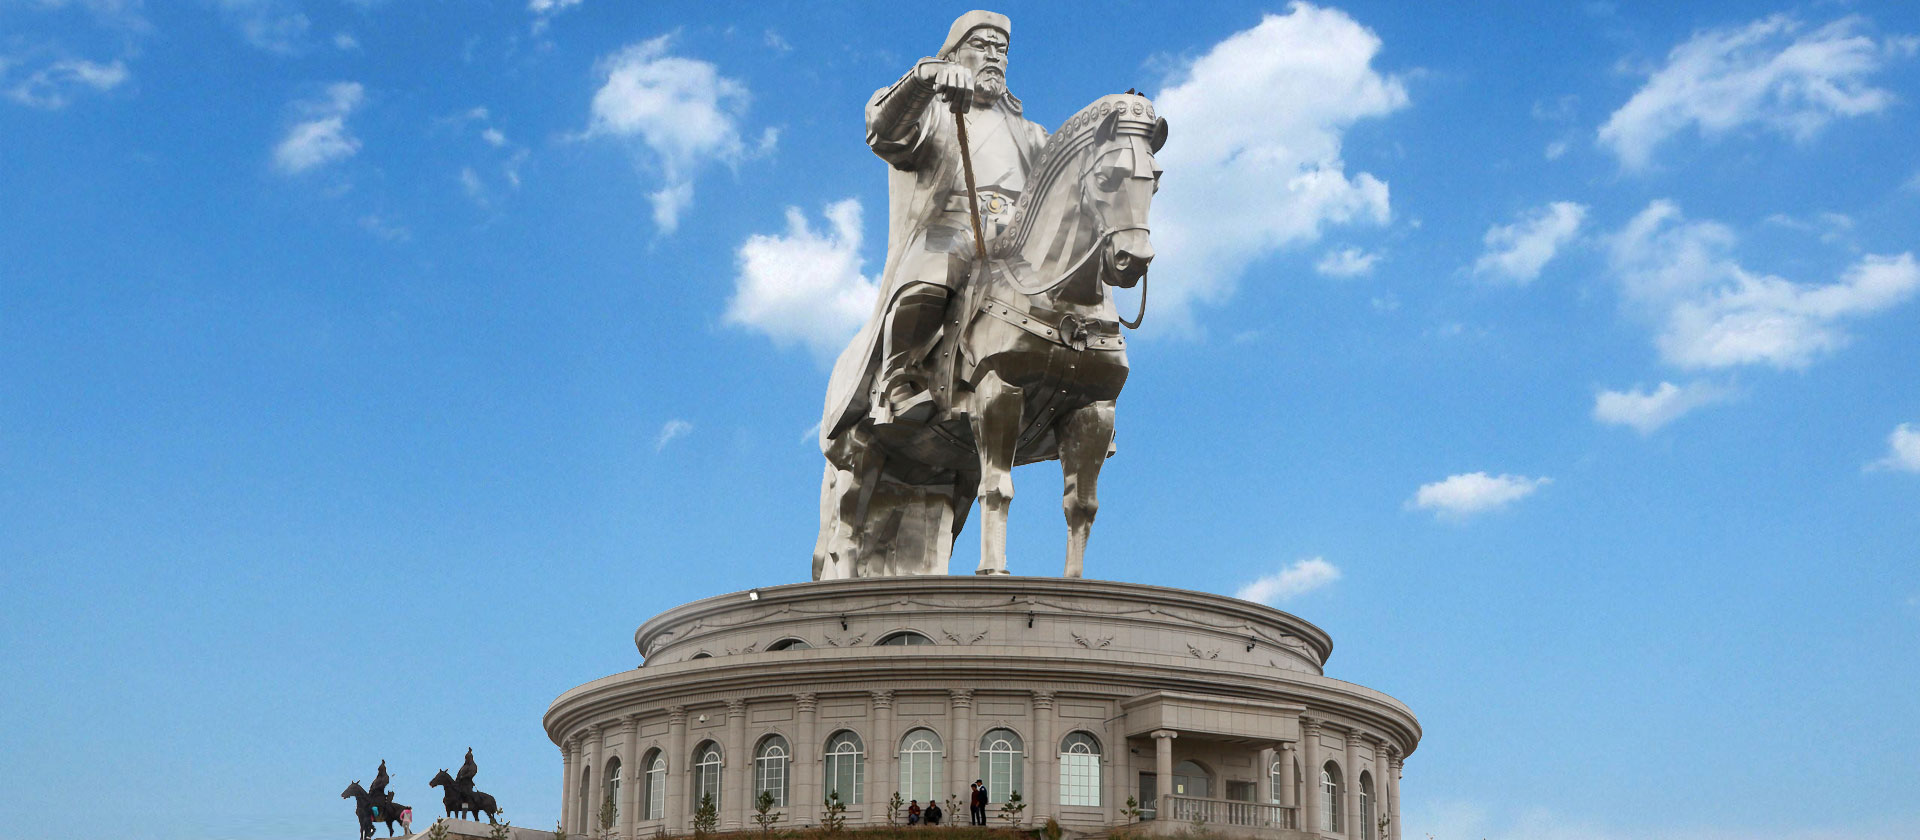 The Statue Of Genghis Khan